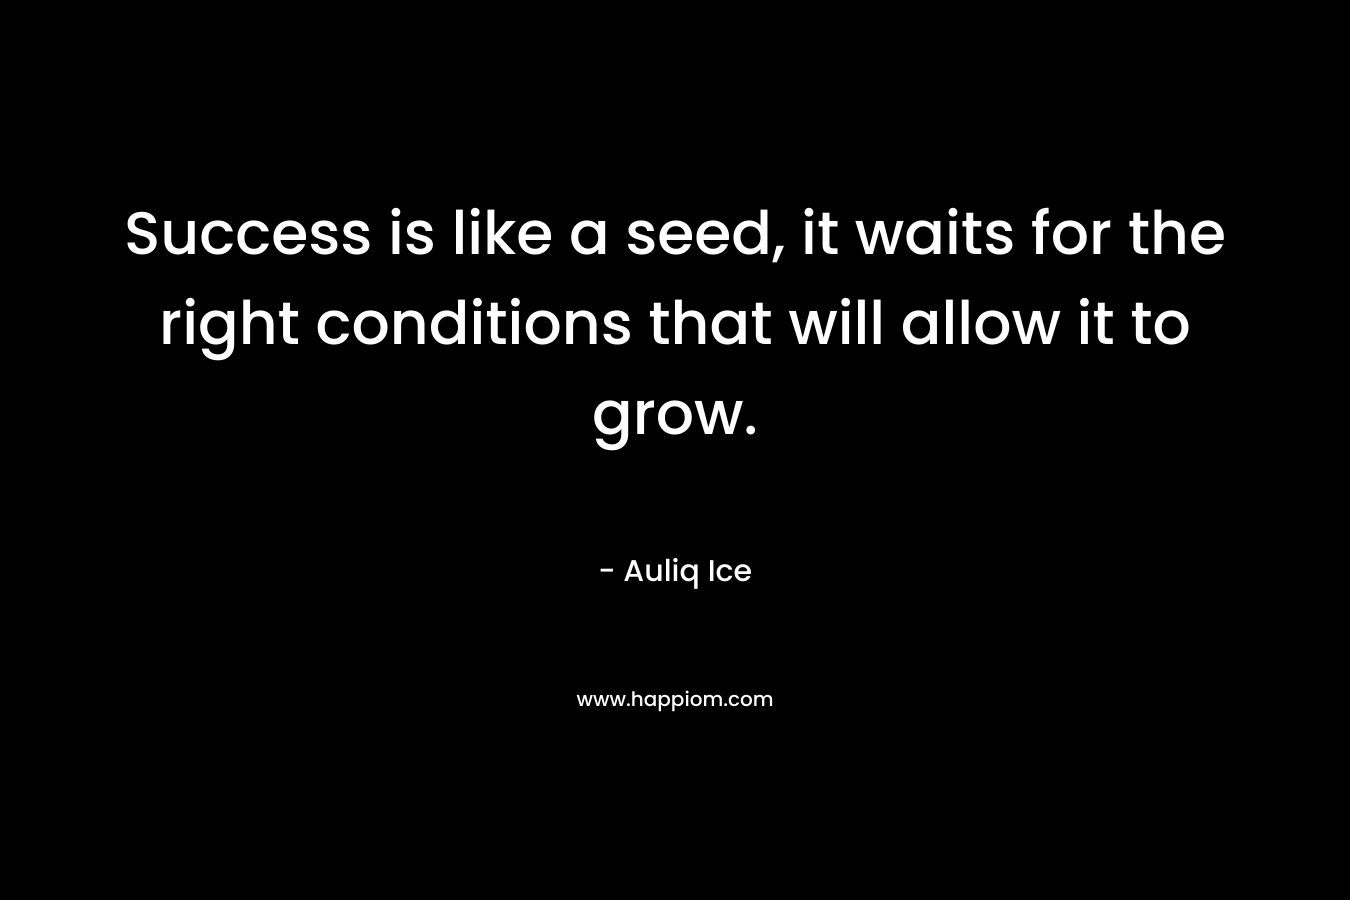 Success is like a seed, it waits for the right conditions that will allow it to grow.